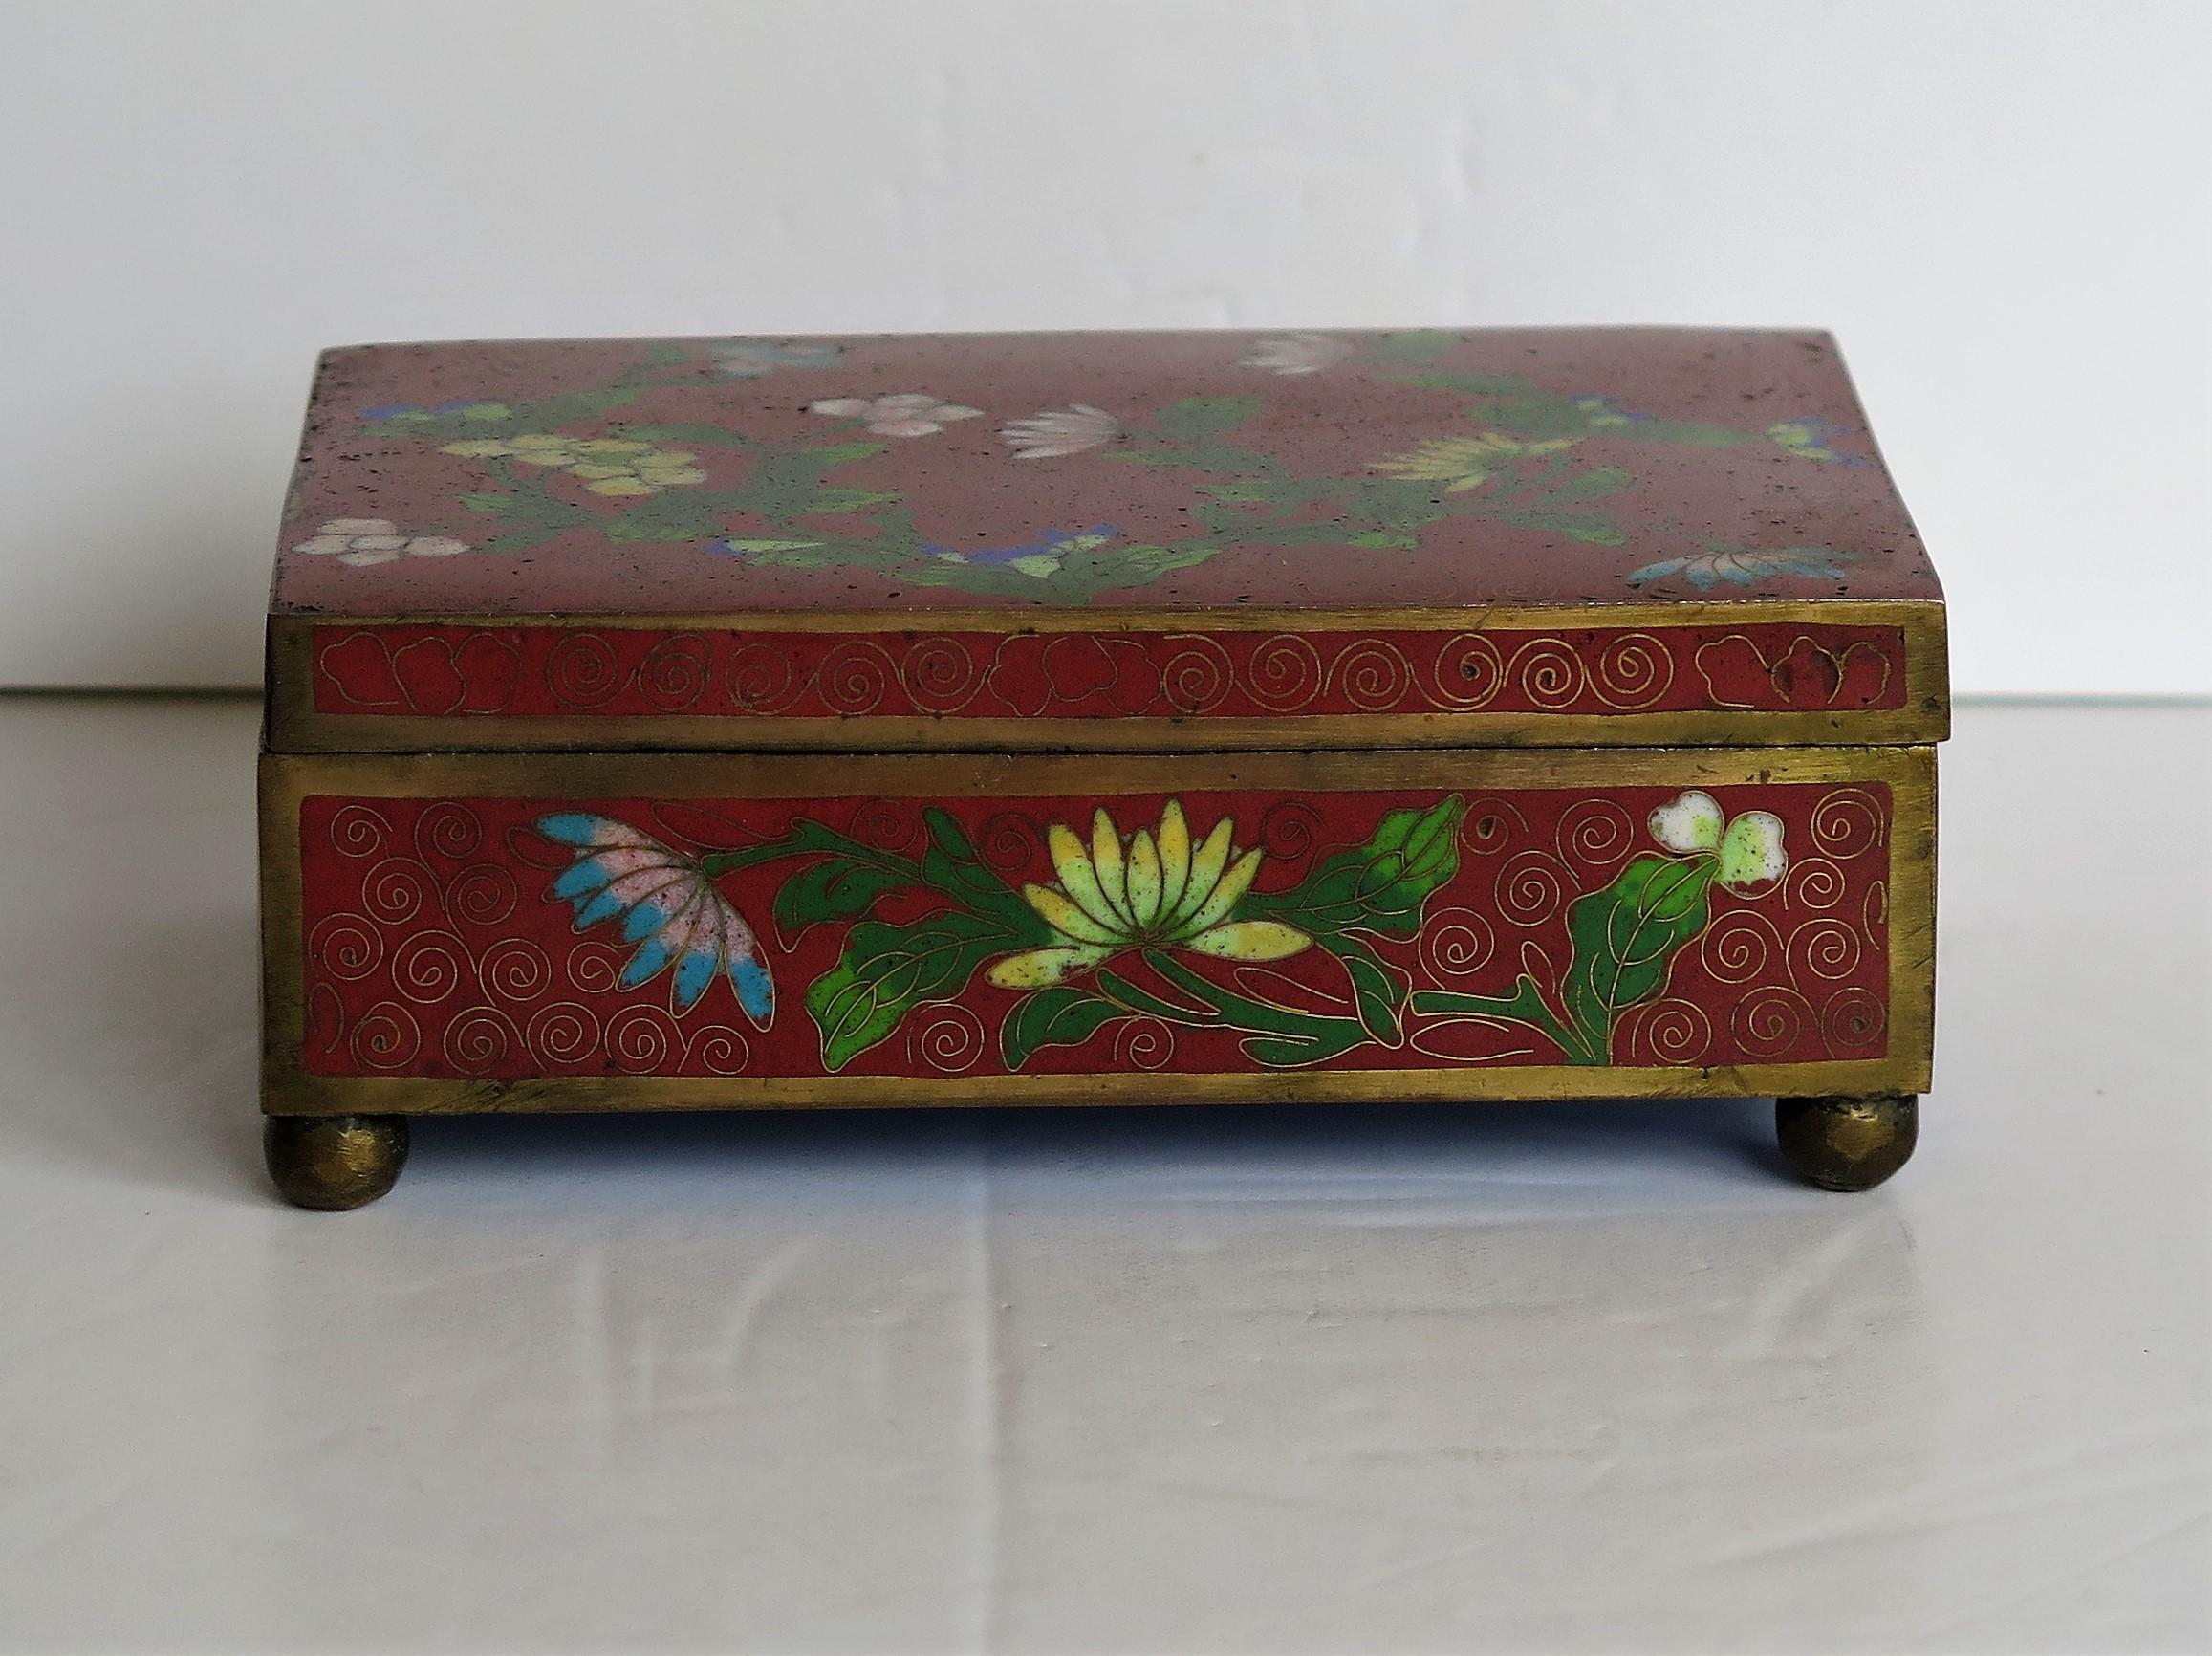 Ceramic Chinese Cloisonné Box on Bun Feet with Hinged Lid, Late Qing Dynasty, circa 1900